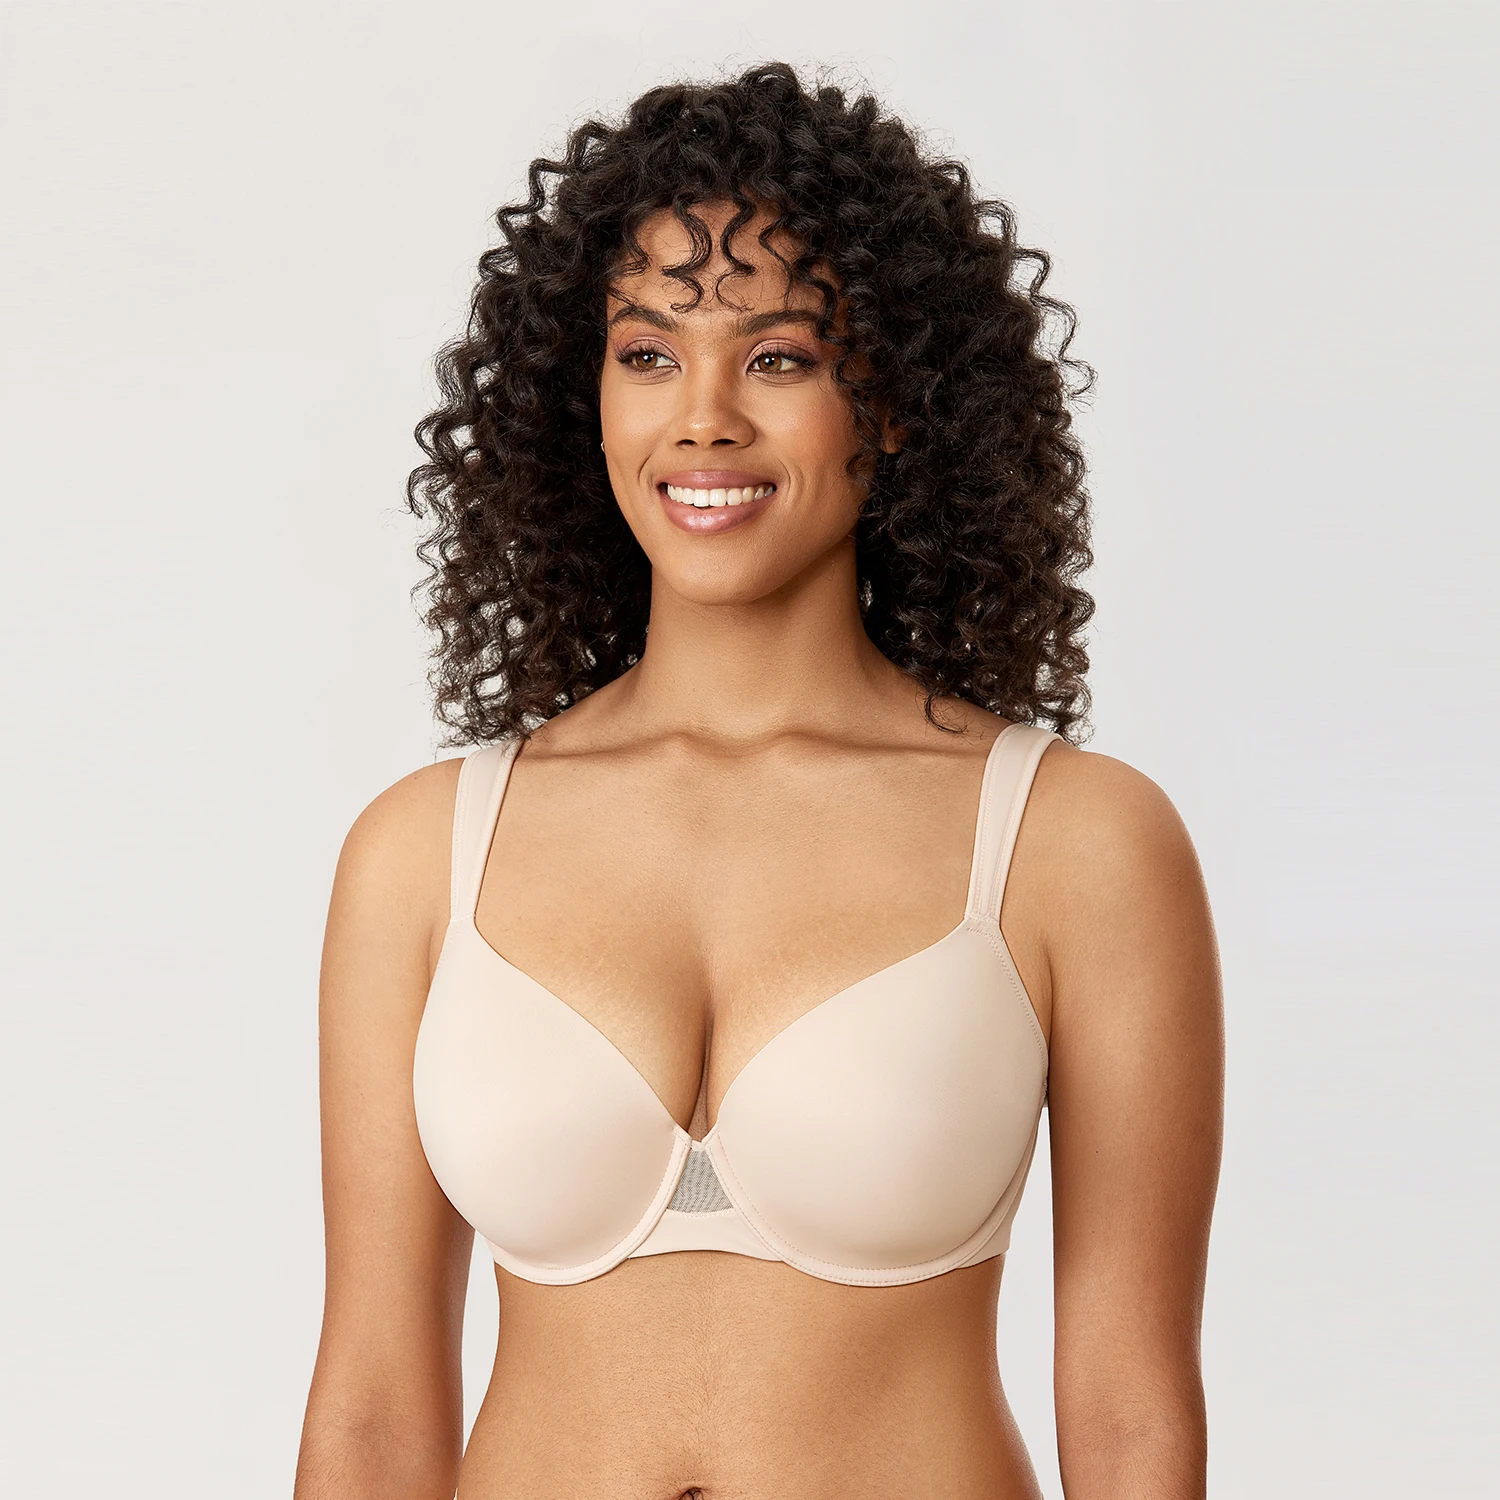 DELIMIRA Women's Plus Size Seamless Lightly Lined Contour Cup Full